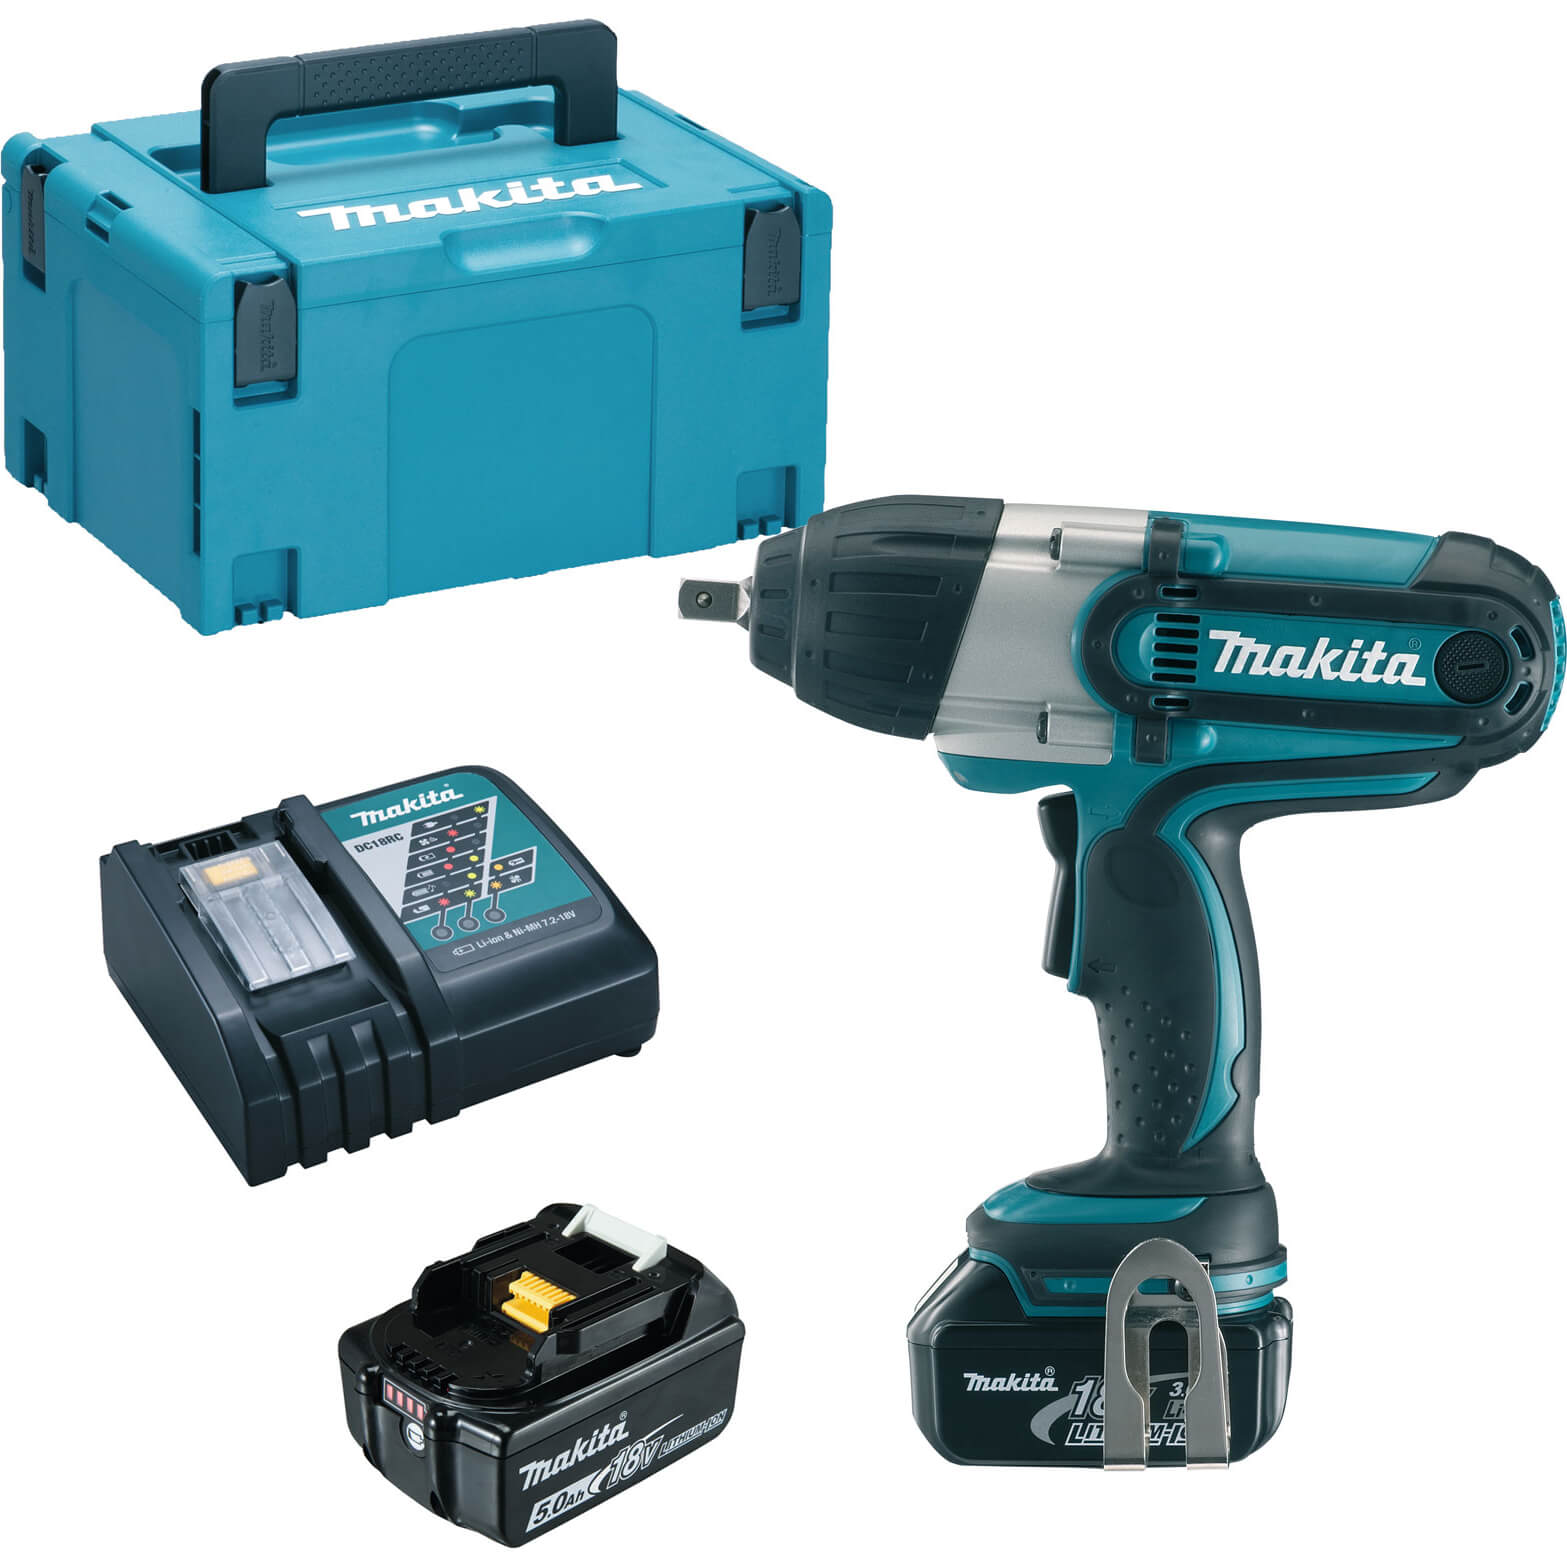 Image of Makita DTW450 18v LXT Cordless 1/2" Drive Impact Wrench 2 x 5ah Li-ion Charger Case